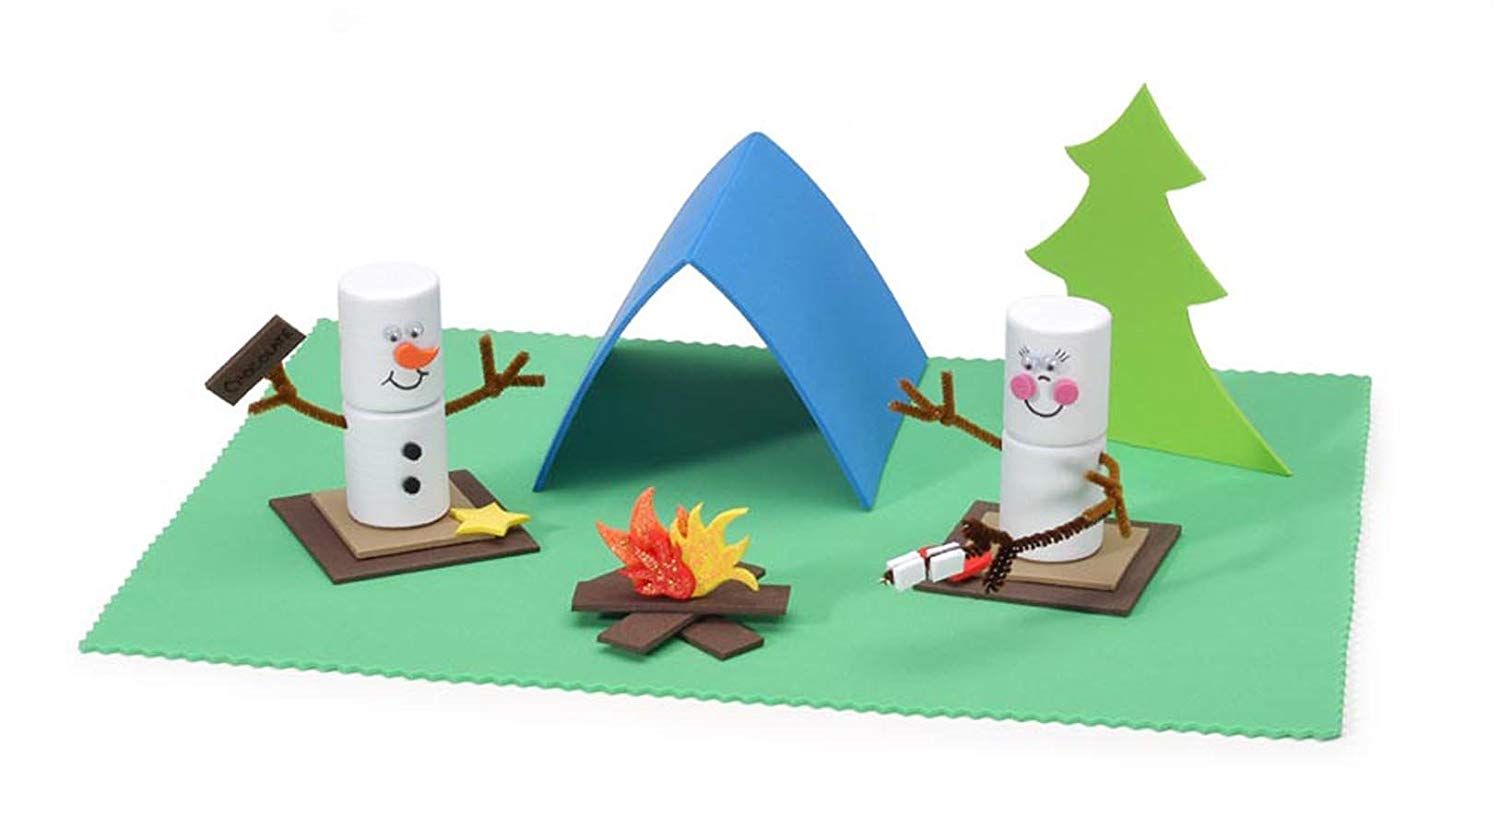 Two DIY snowman and a miniature bonfire with tent and pine tree in the background